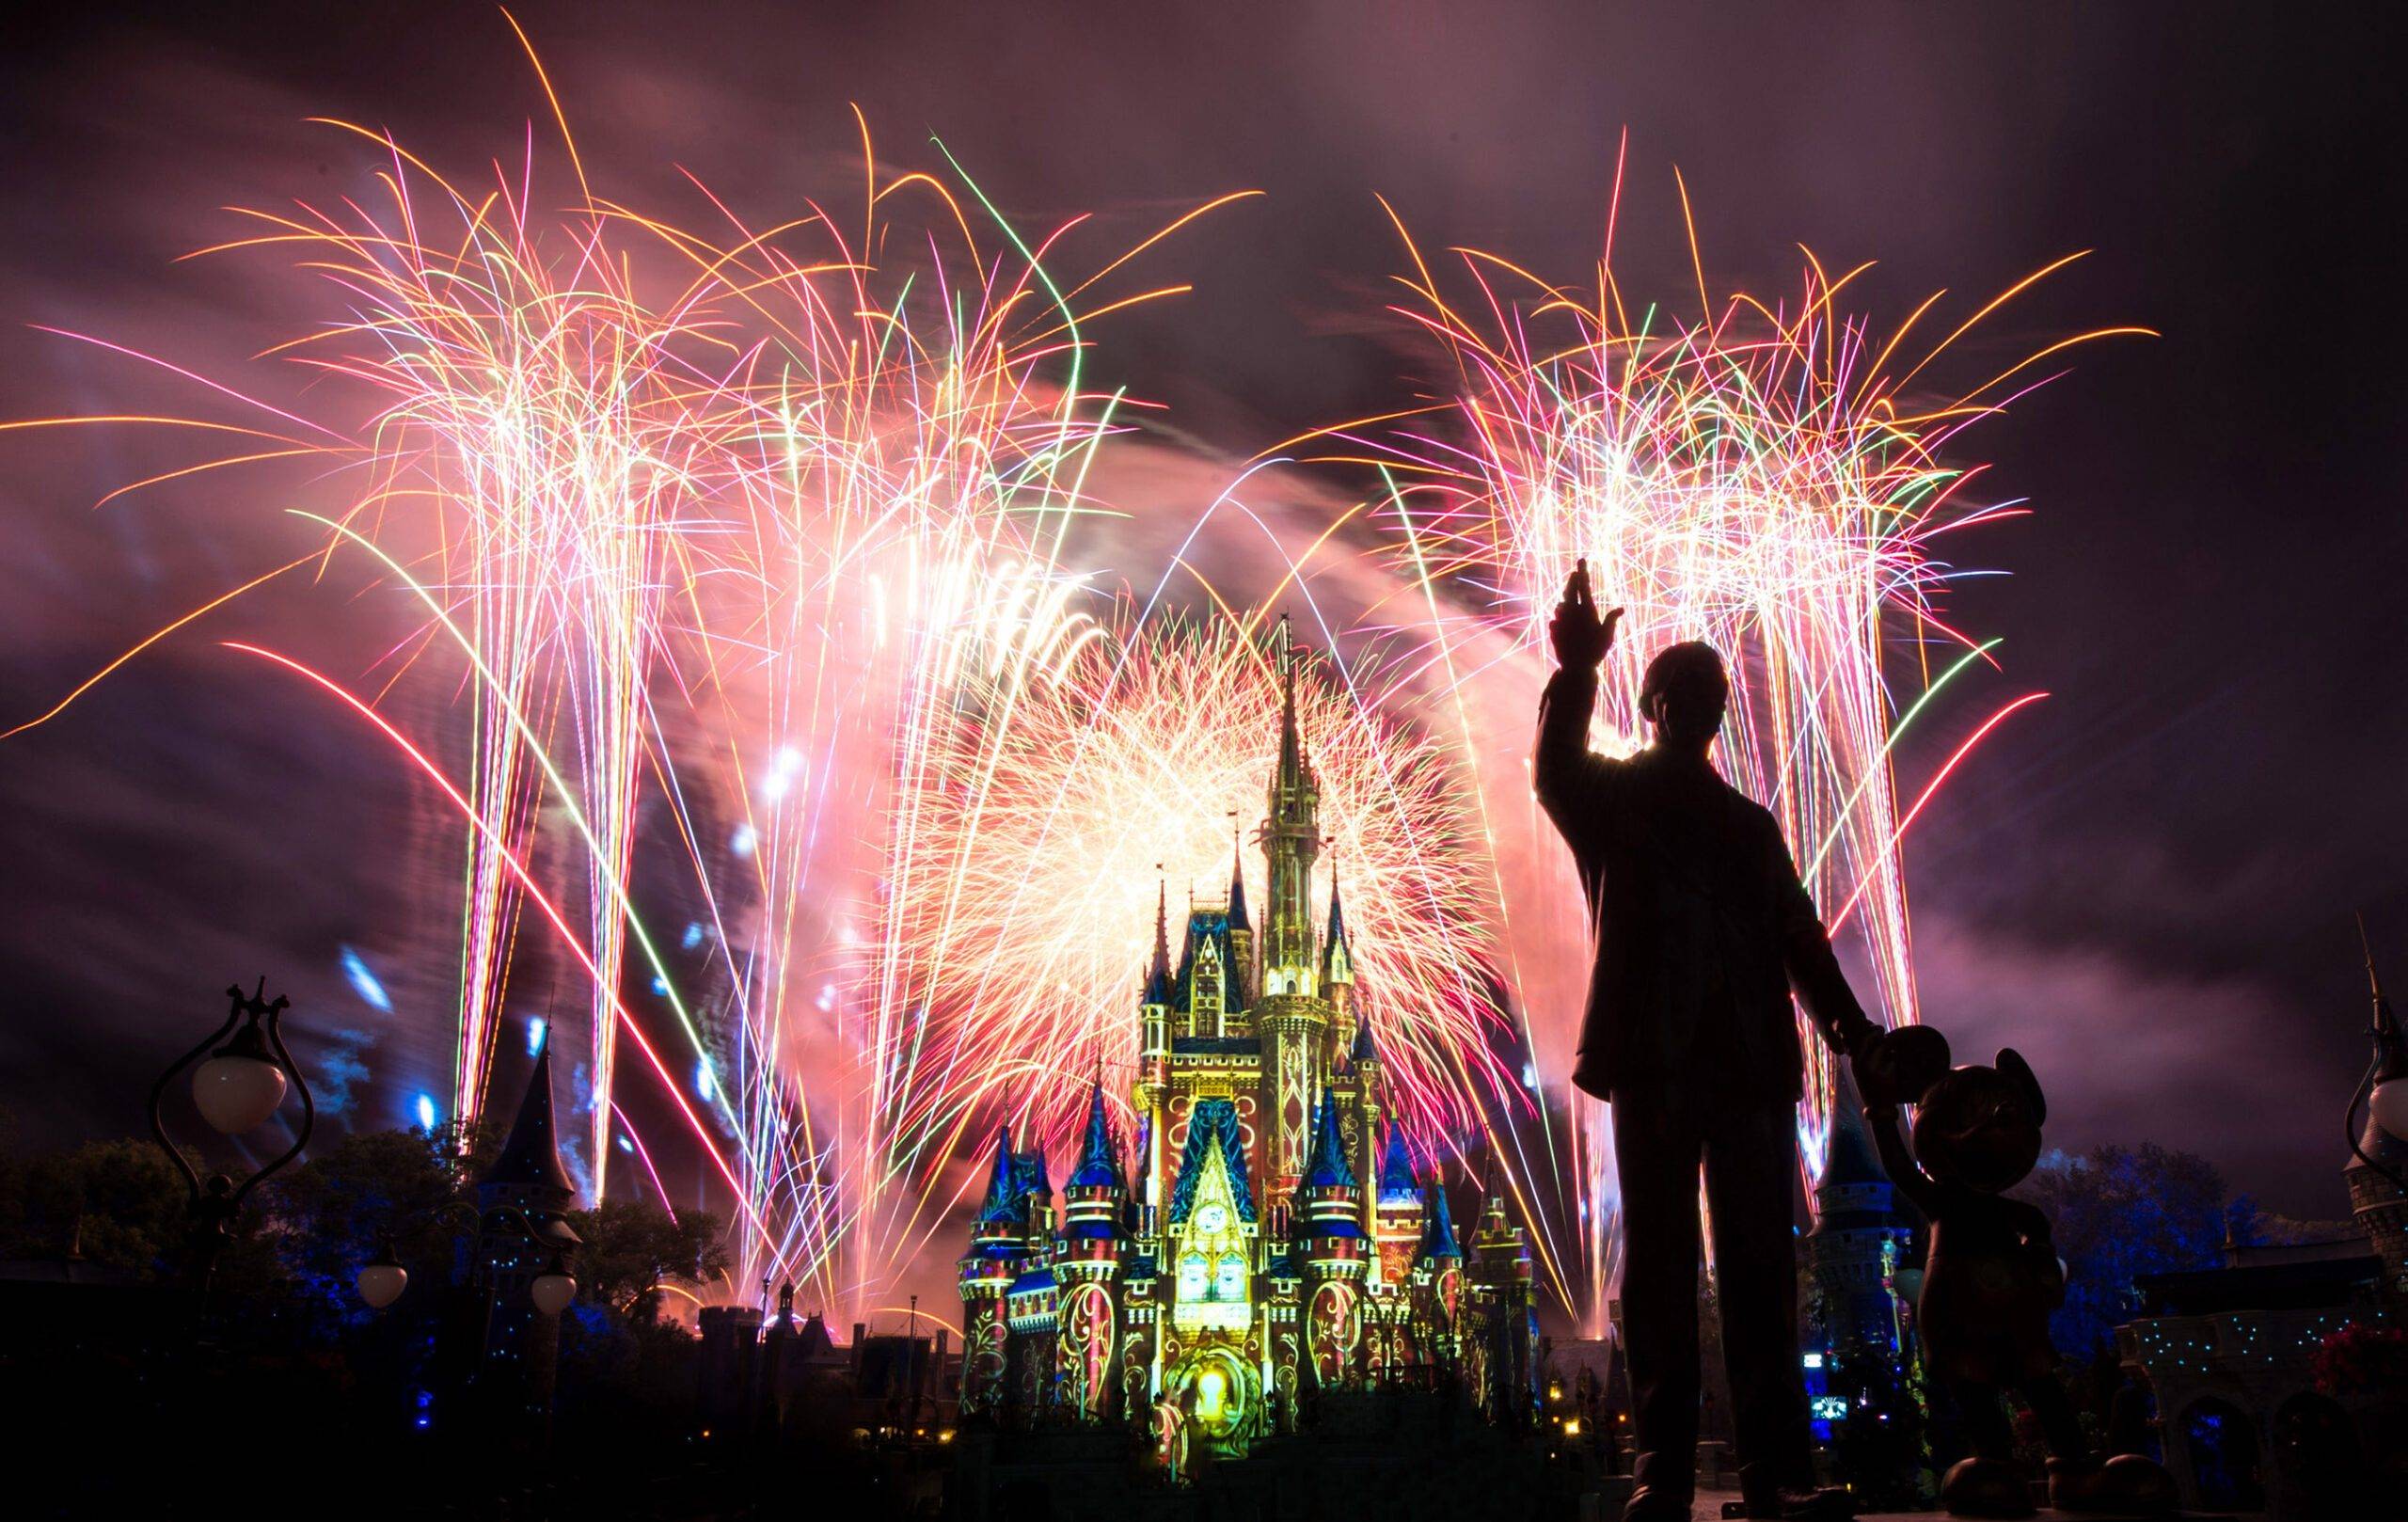 Fireworks have been missing from the Magic Kingdom since the park reopened in July 2020